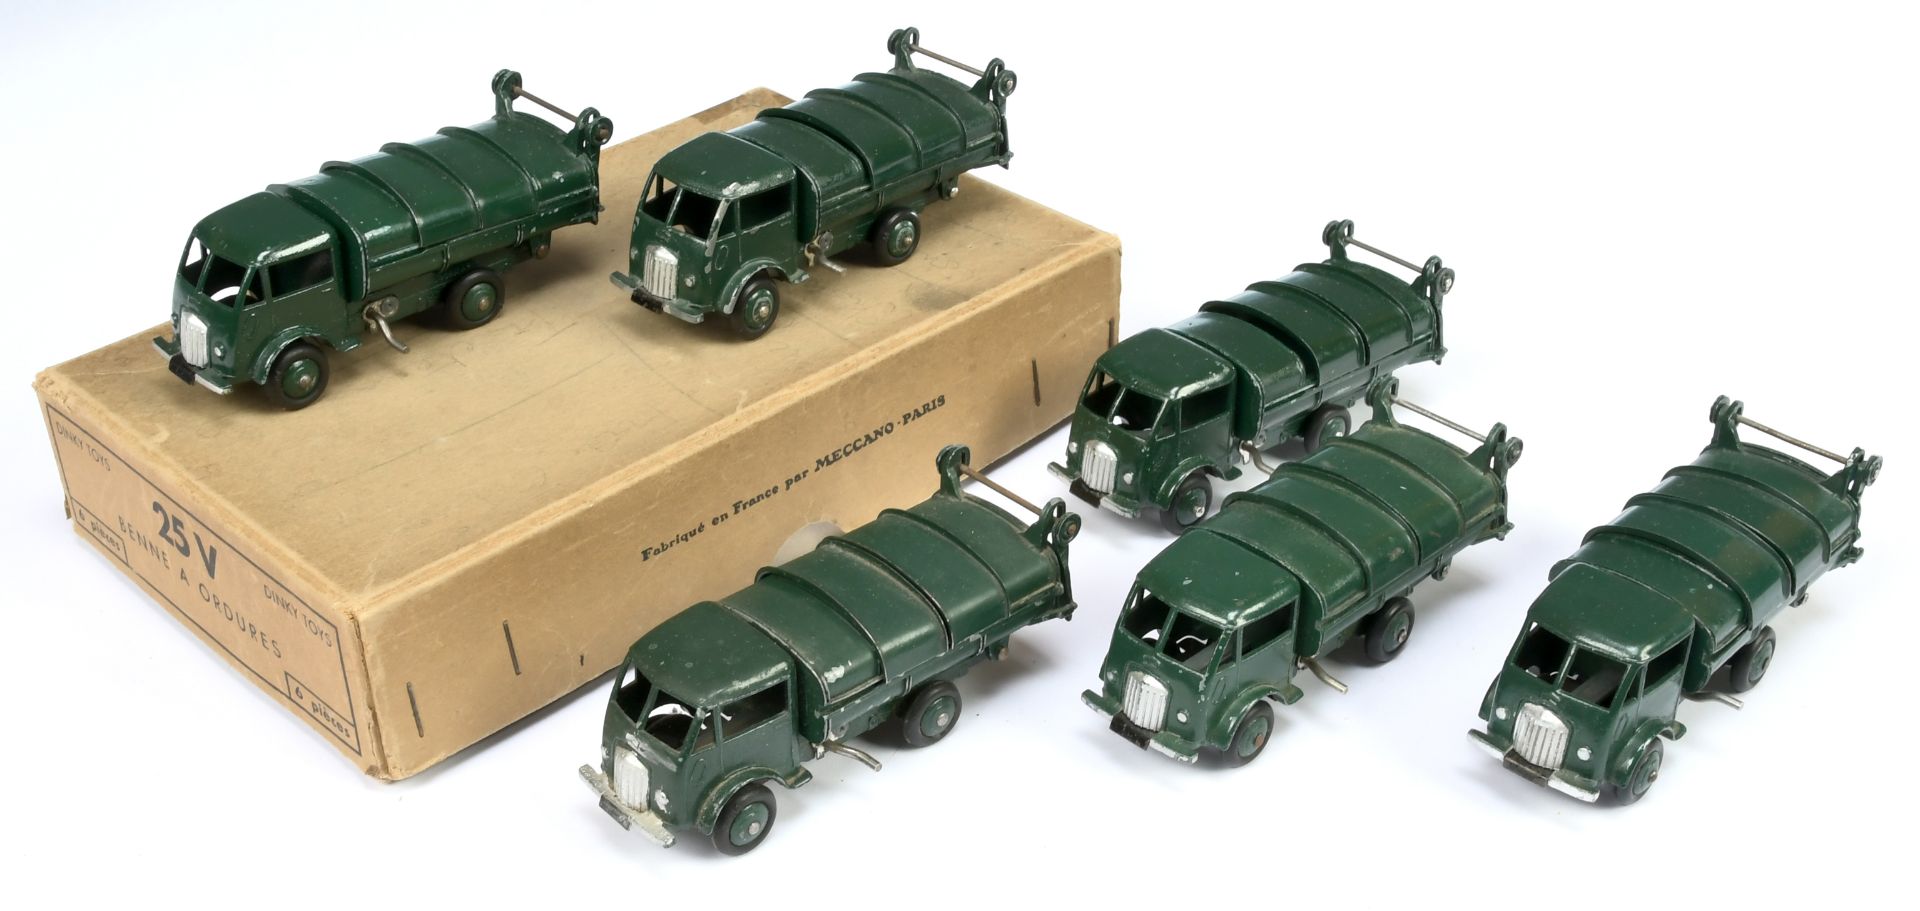 French Dinky Toys Trade Pack 25V Ford Refuse Truck - contains 6 pieces - Green including convex h...